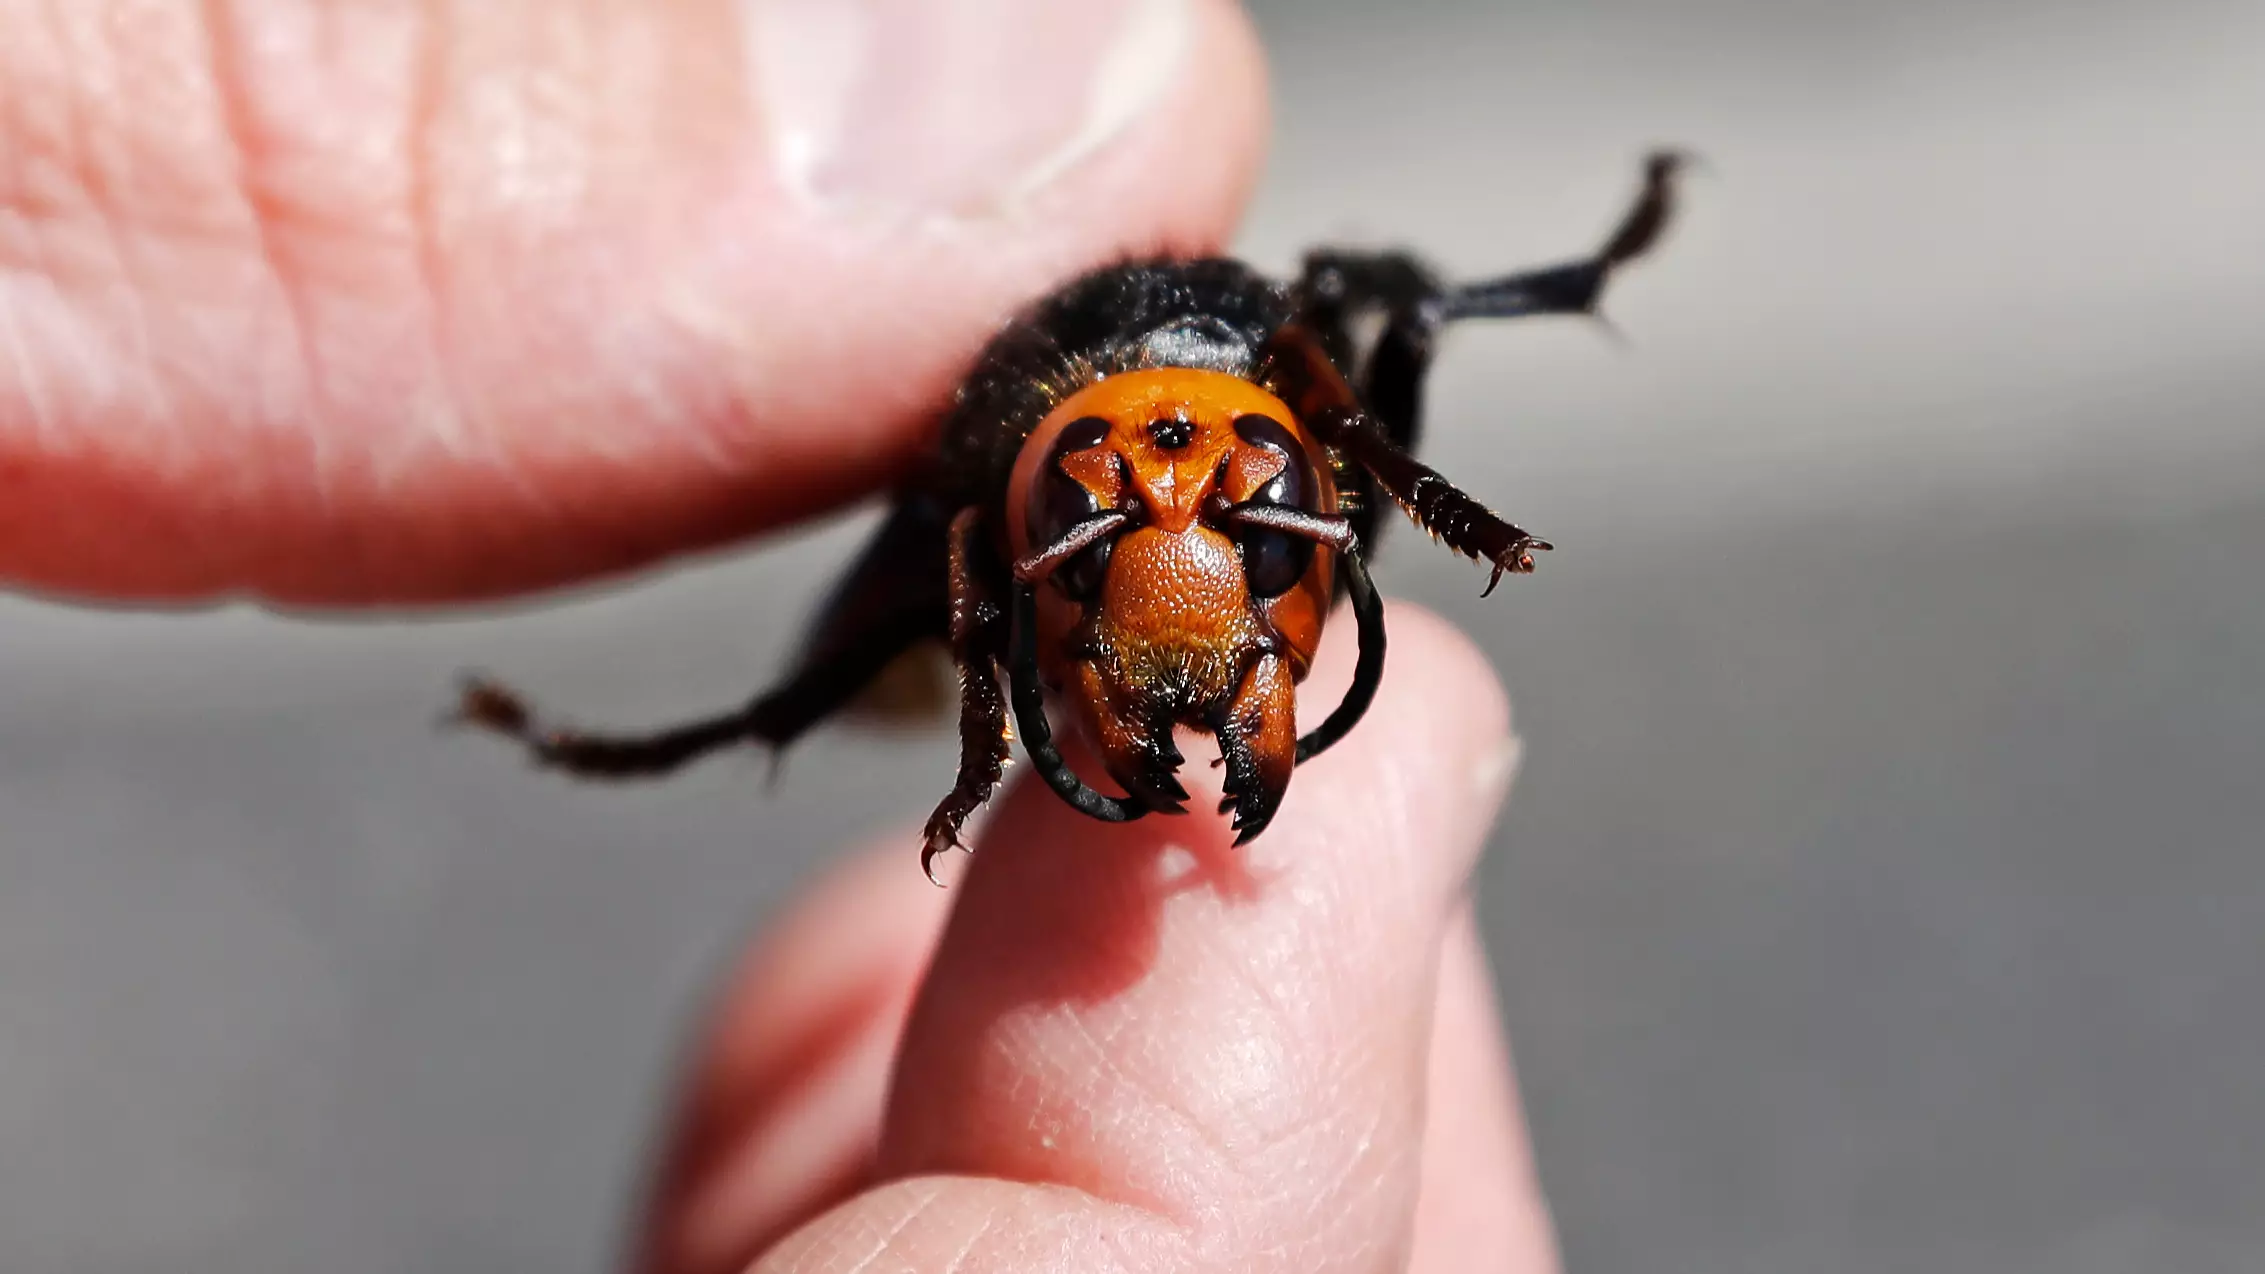 Scientists Are Racing To Capture 'Murder Hornets' Before Their Numbers Increase